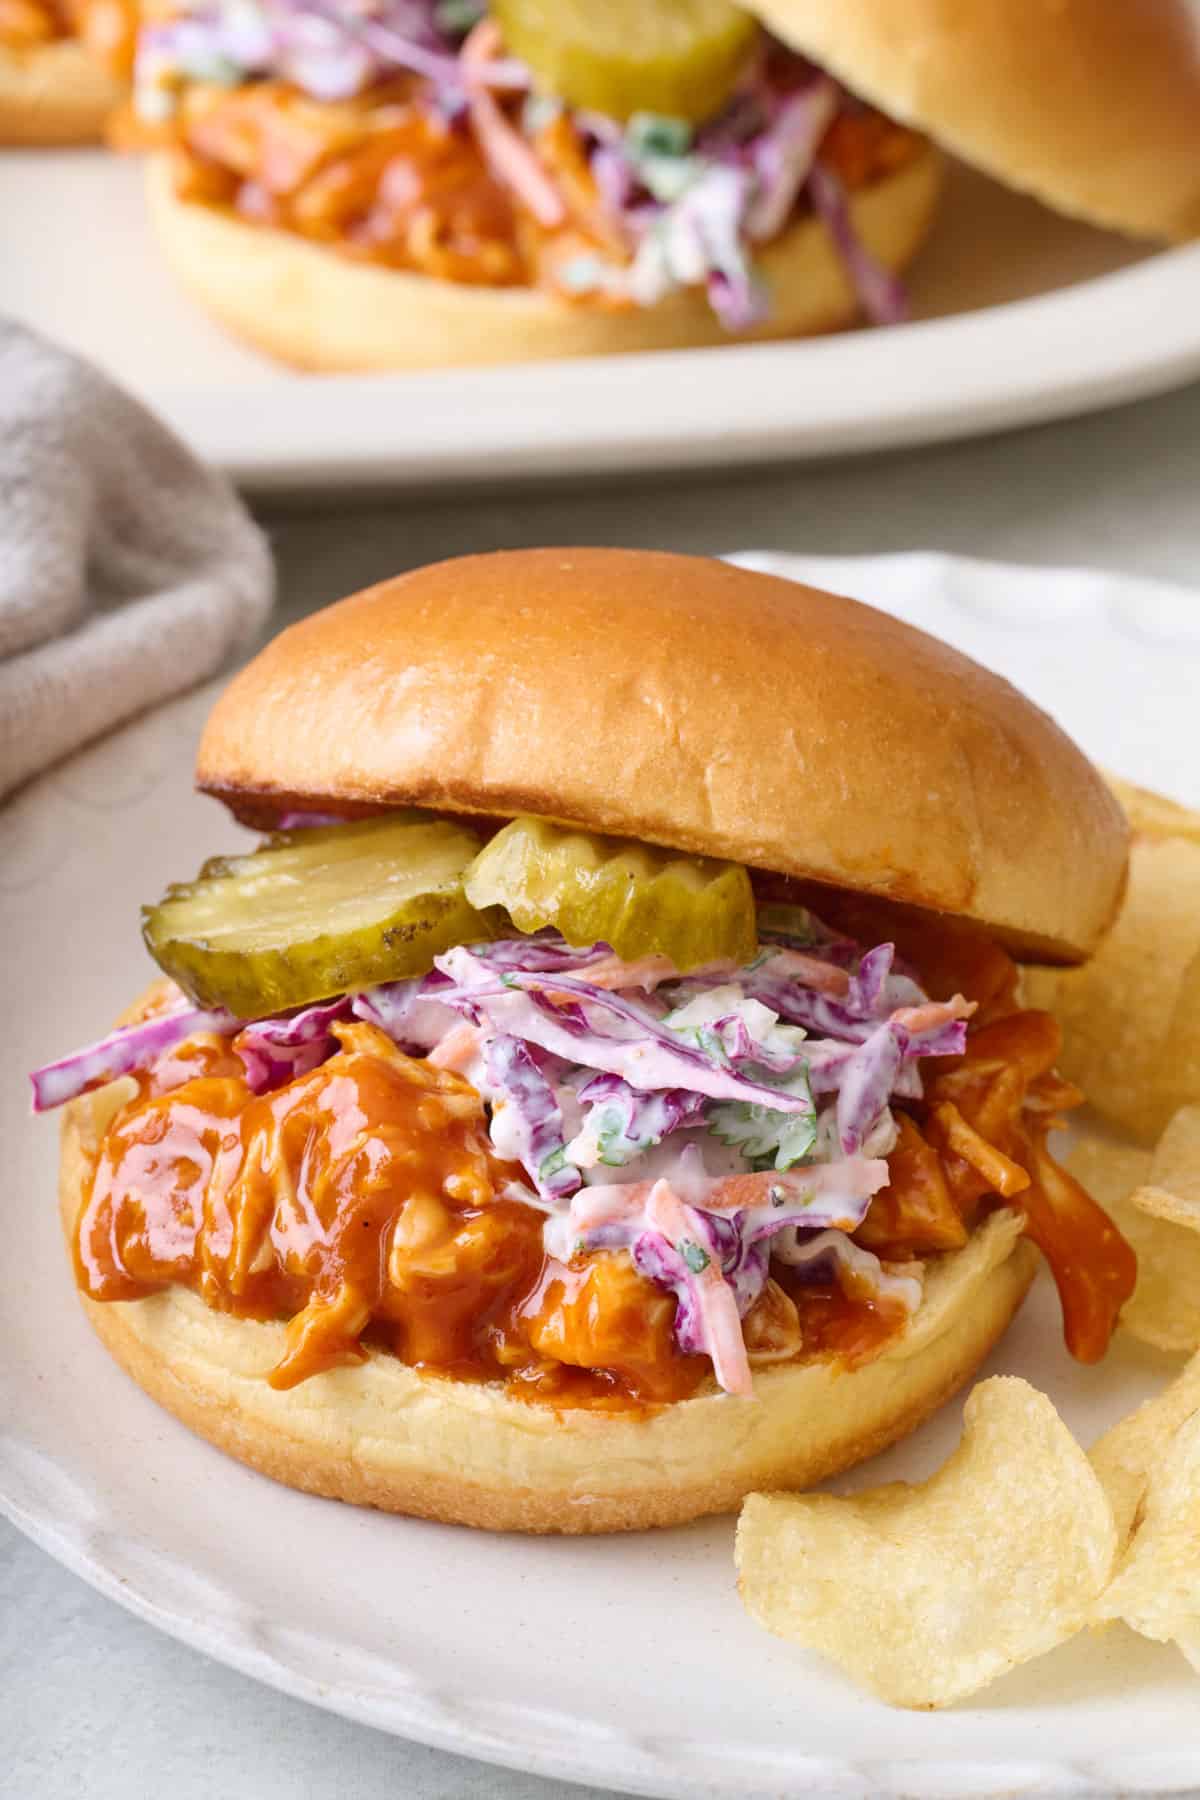 Shredded bbq chicken sandwich on a brioche bun with a homemade coleslaw and sliced pickles.